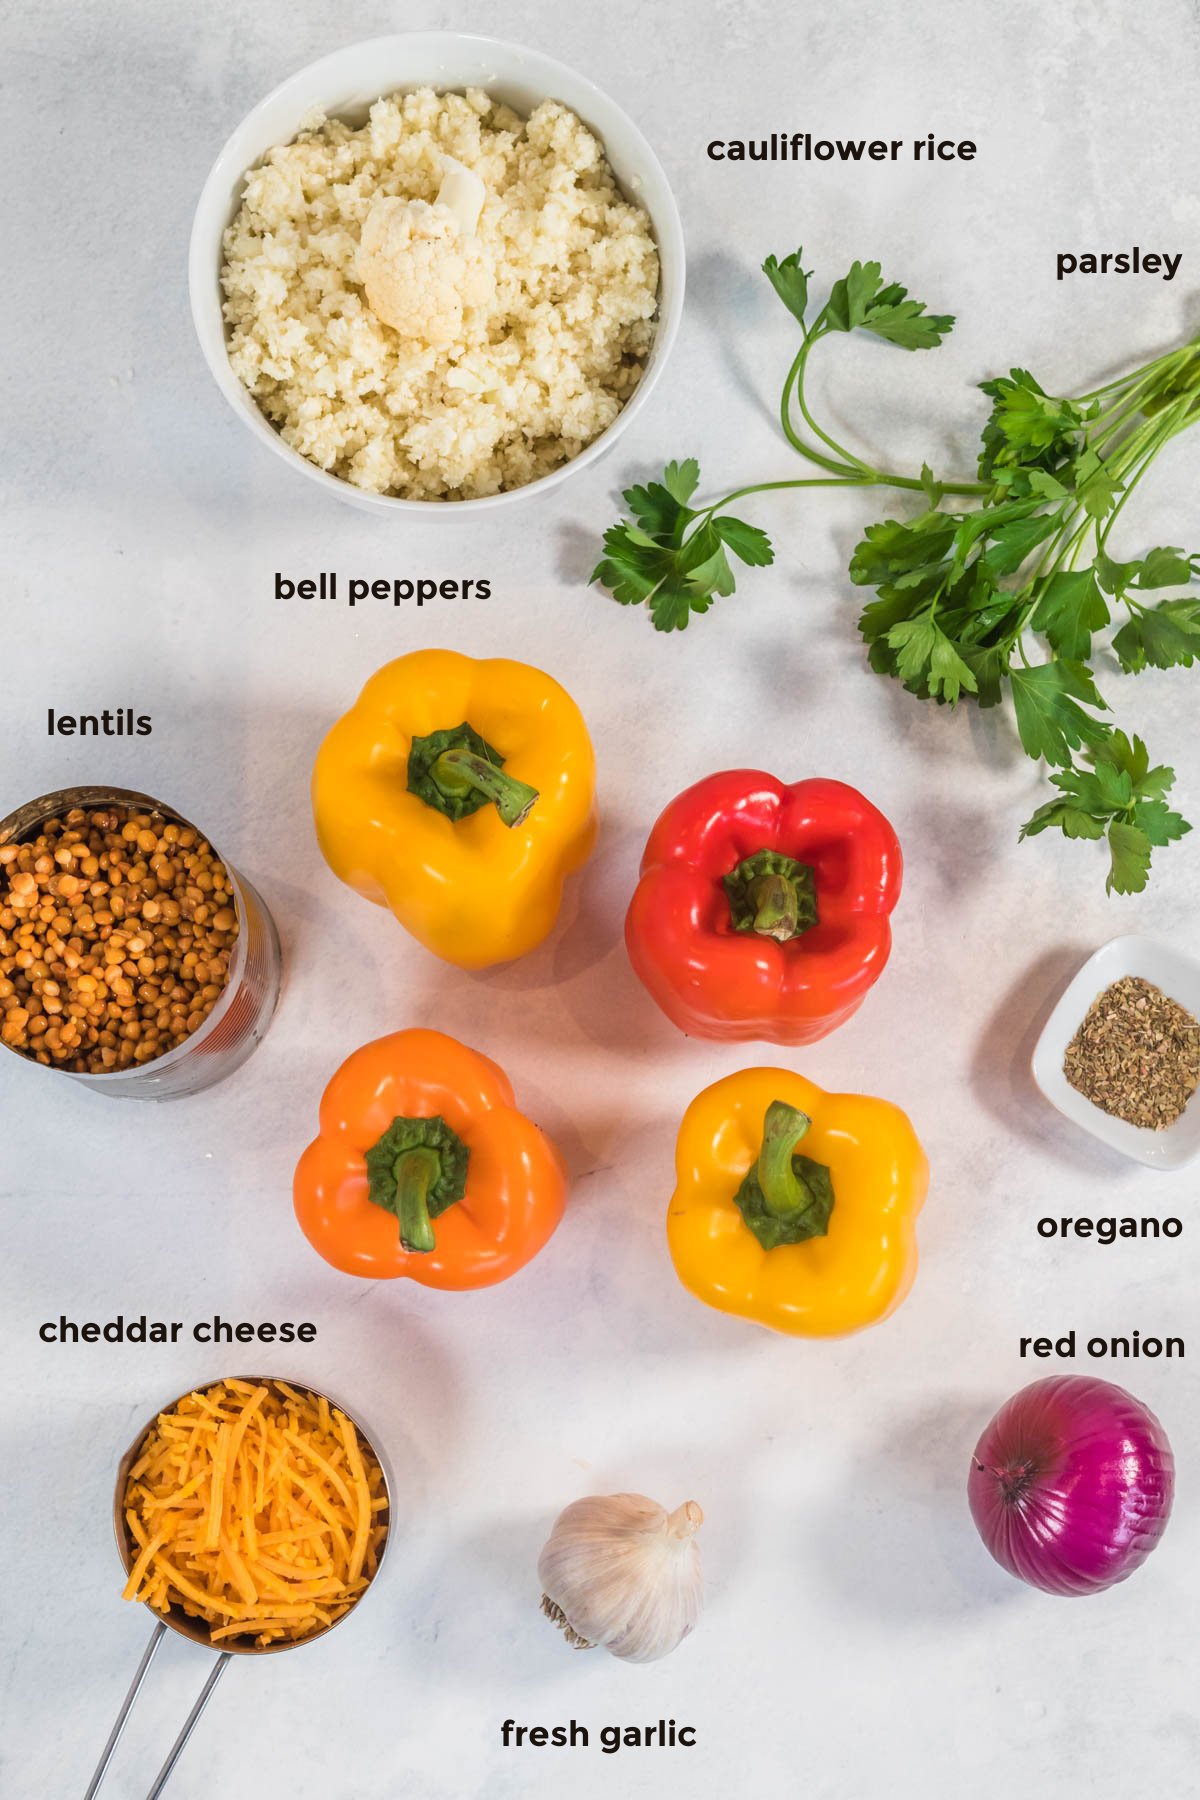 Overhead ingredient shot including multicolored bell peppers, red onion, cauliflower rice, lentils, cheese, parsley, oregano, and garlic.